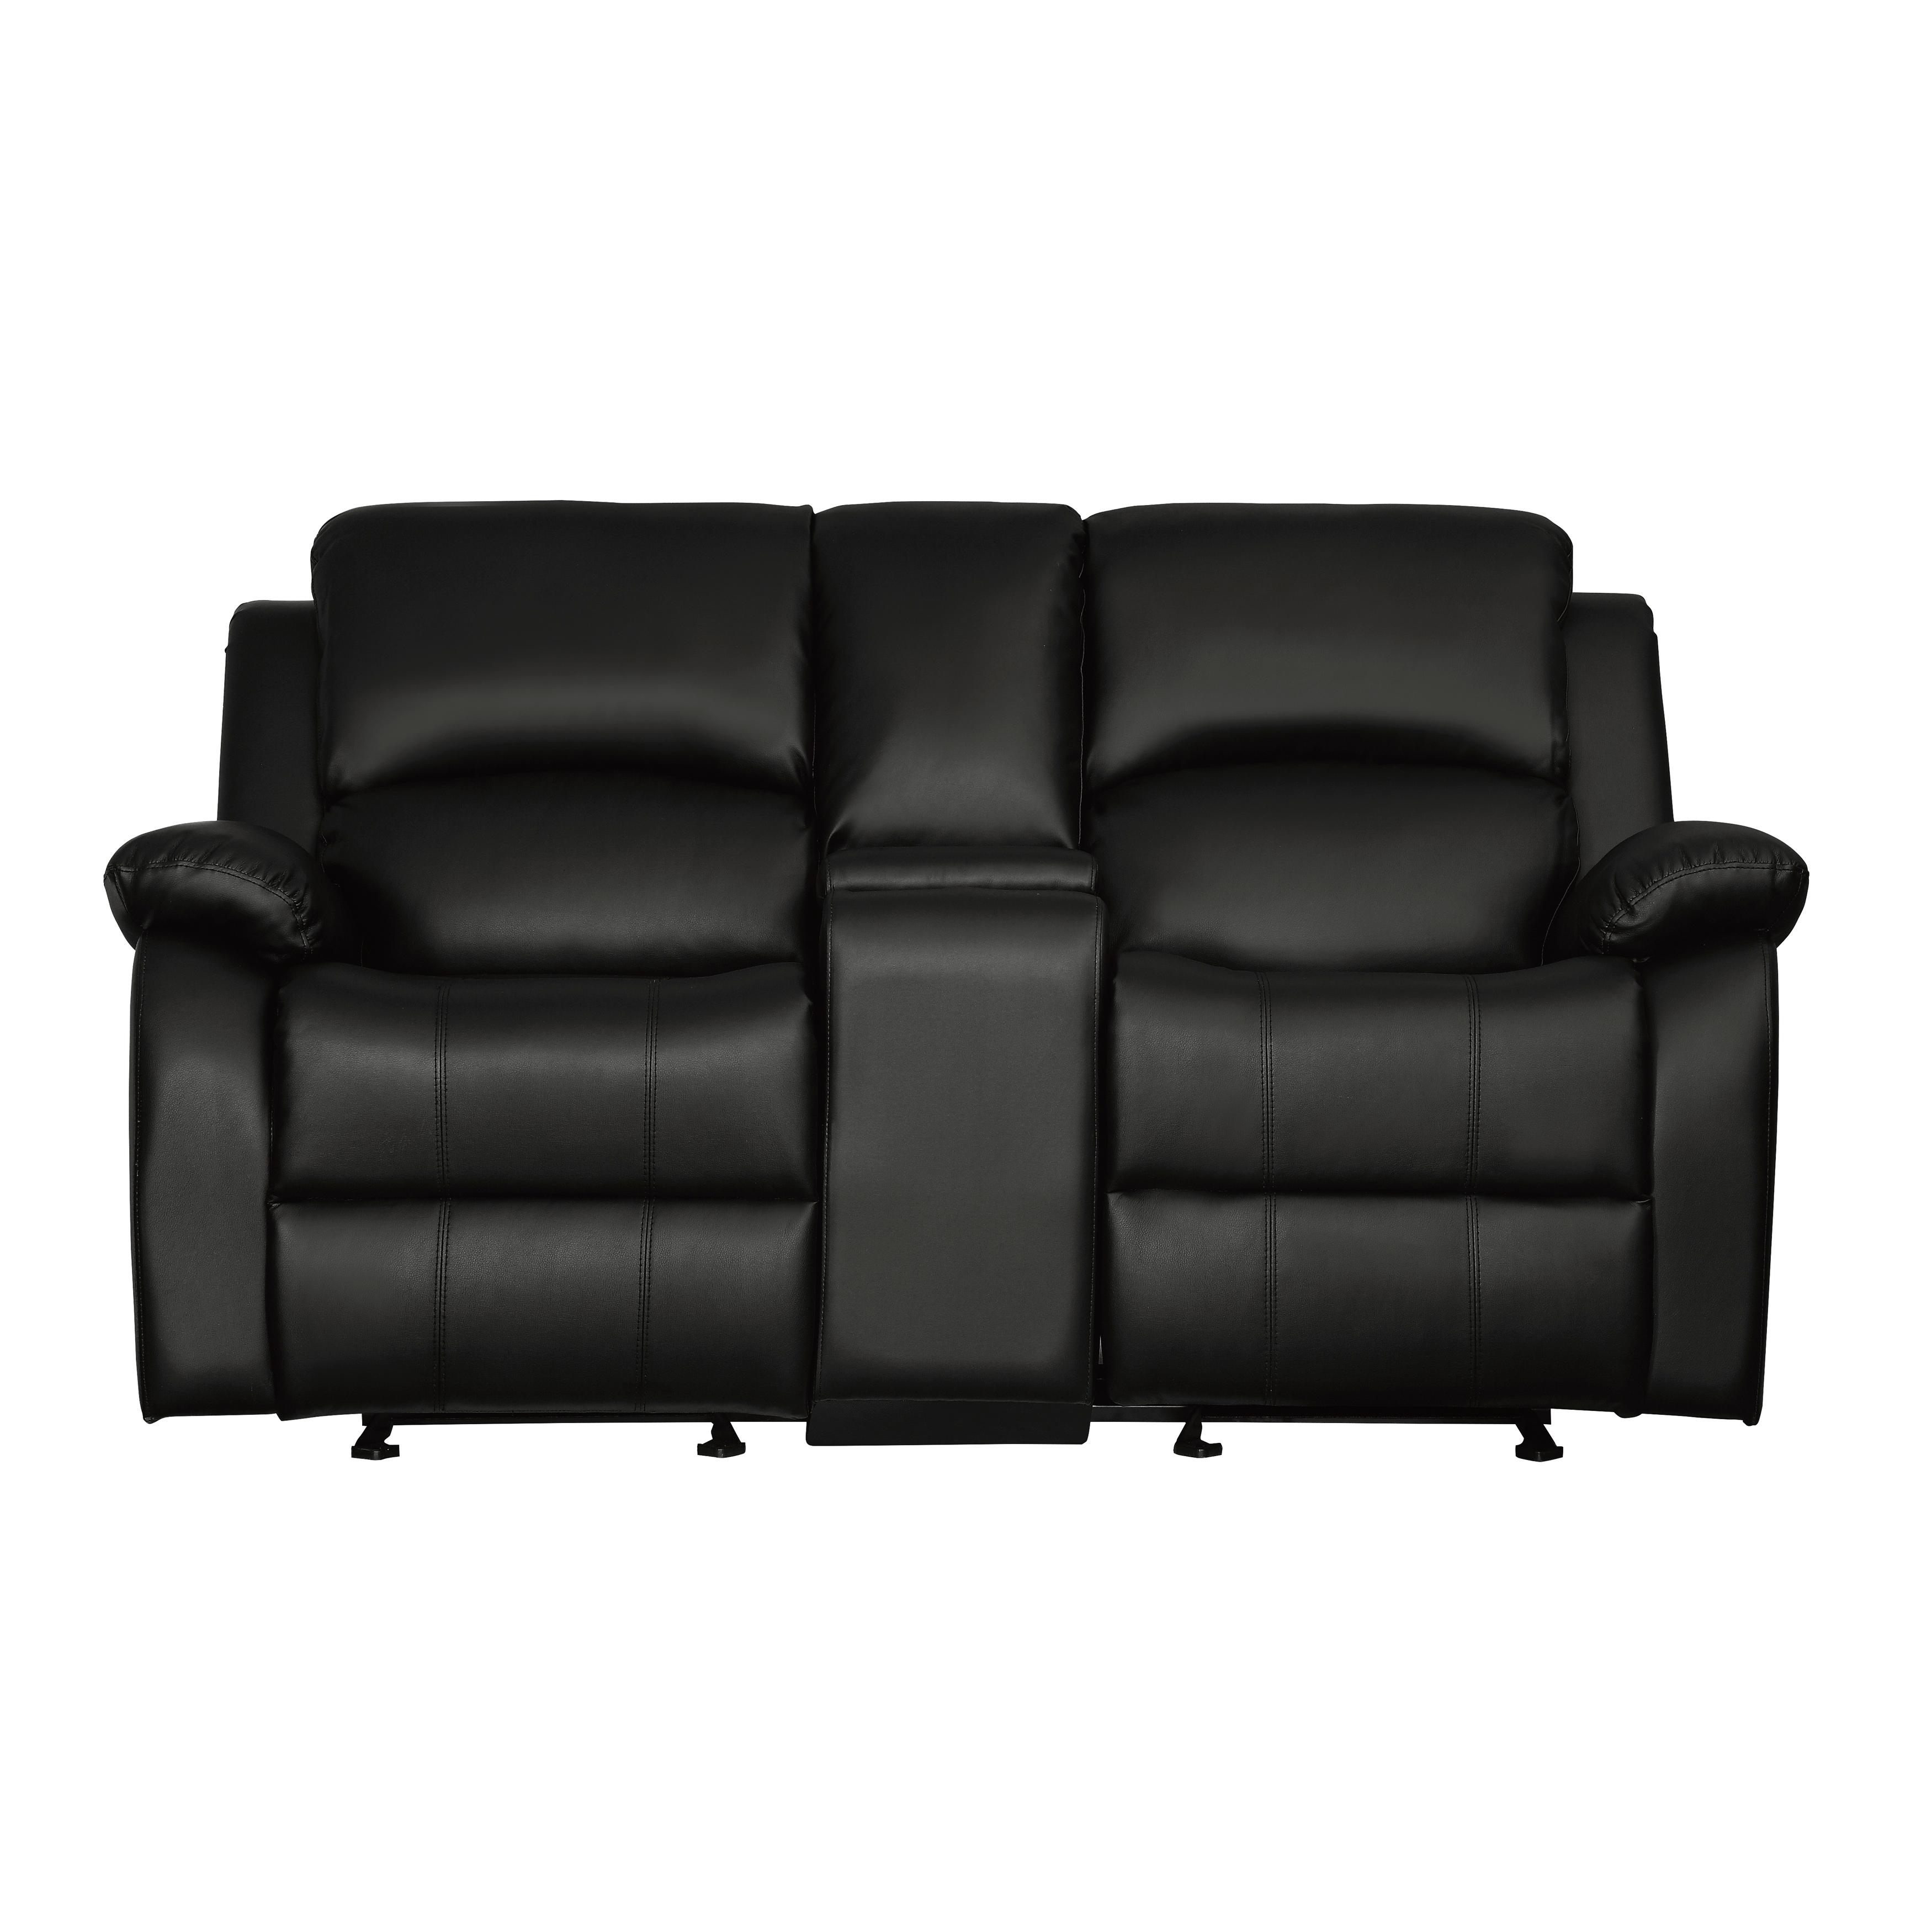 Transitional Reclining Loveseat 9928BLK-2 Clarkdale 9928BLK-2 in Black Faux Leather